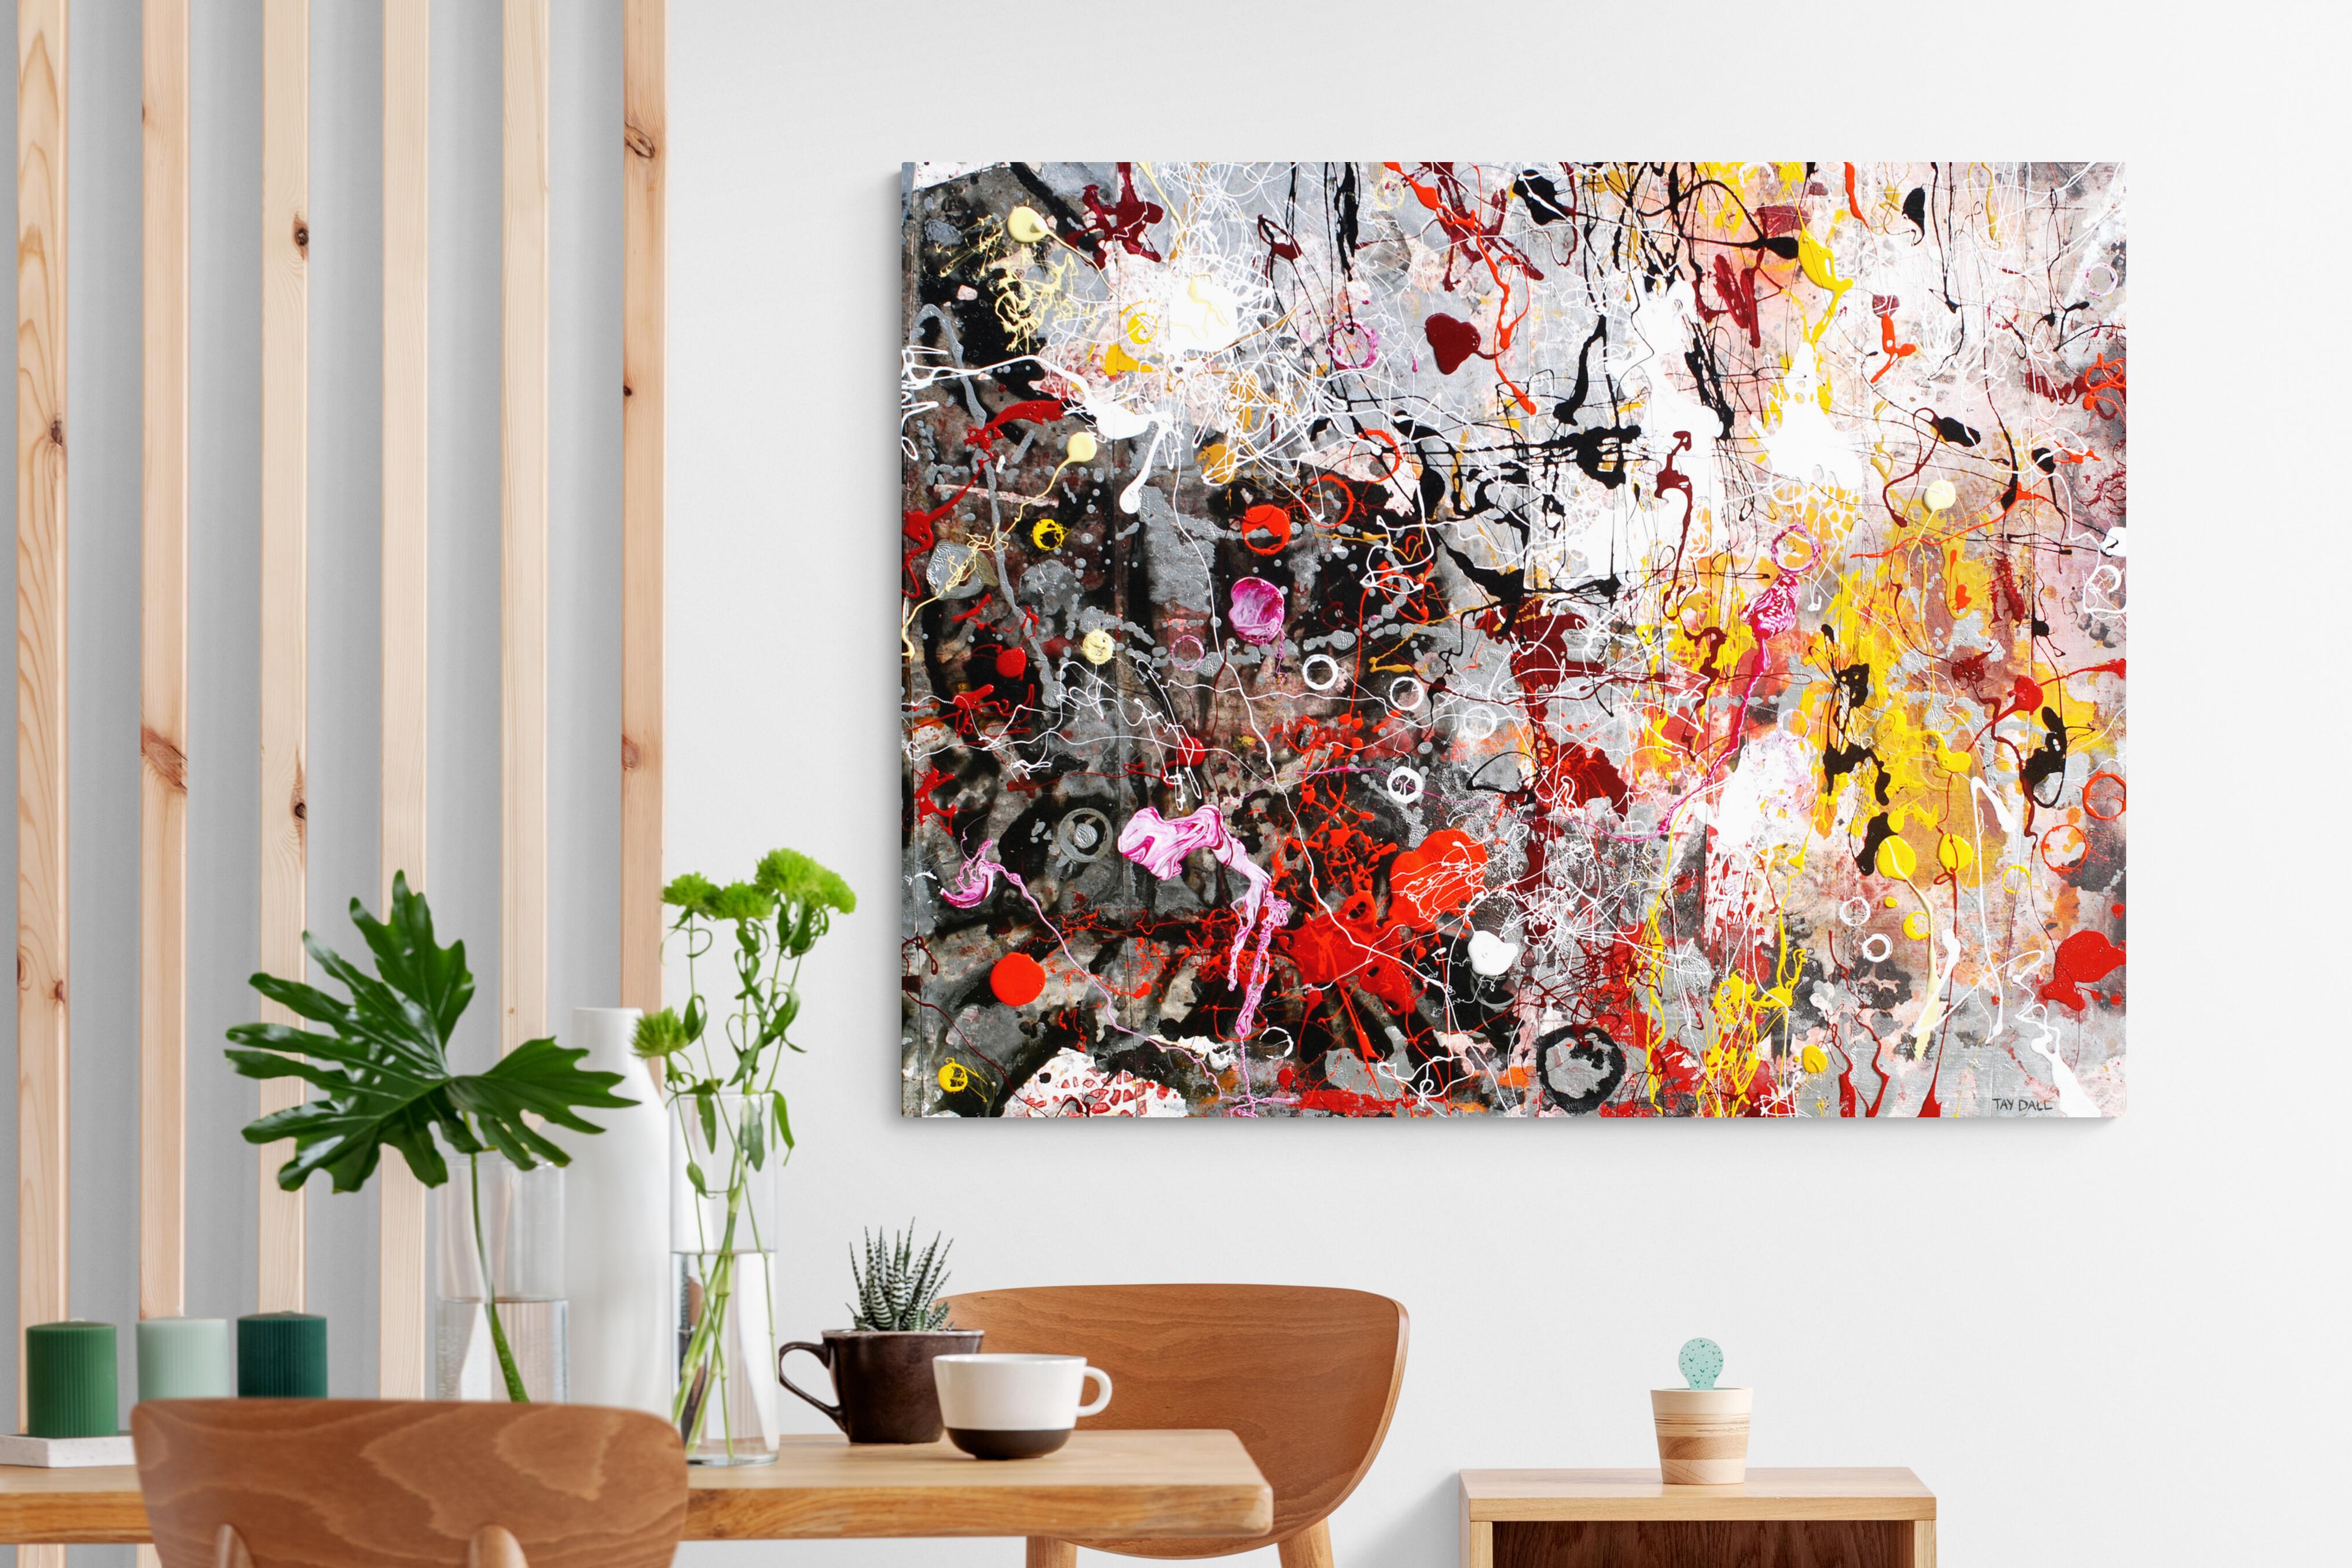 Large Splattered Abstract Painting 